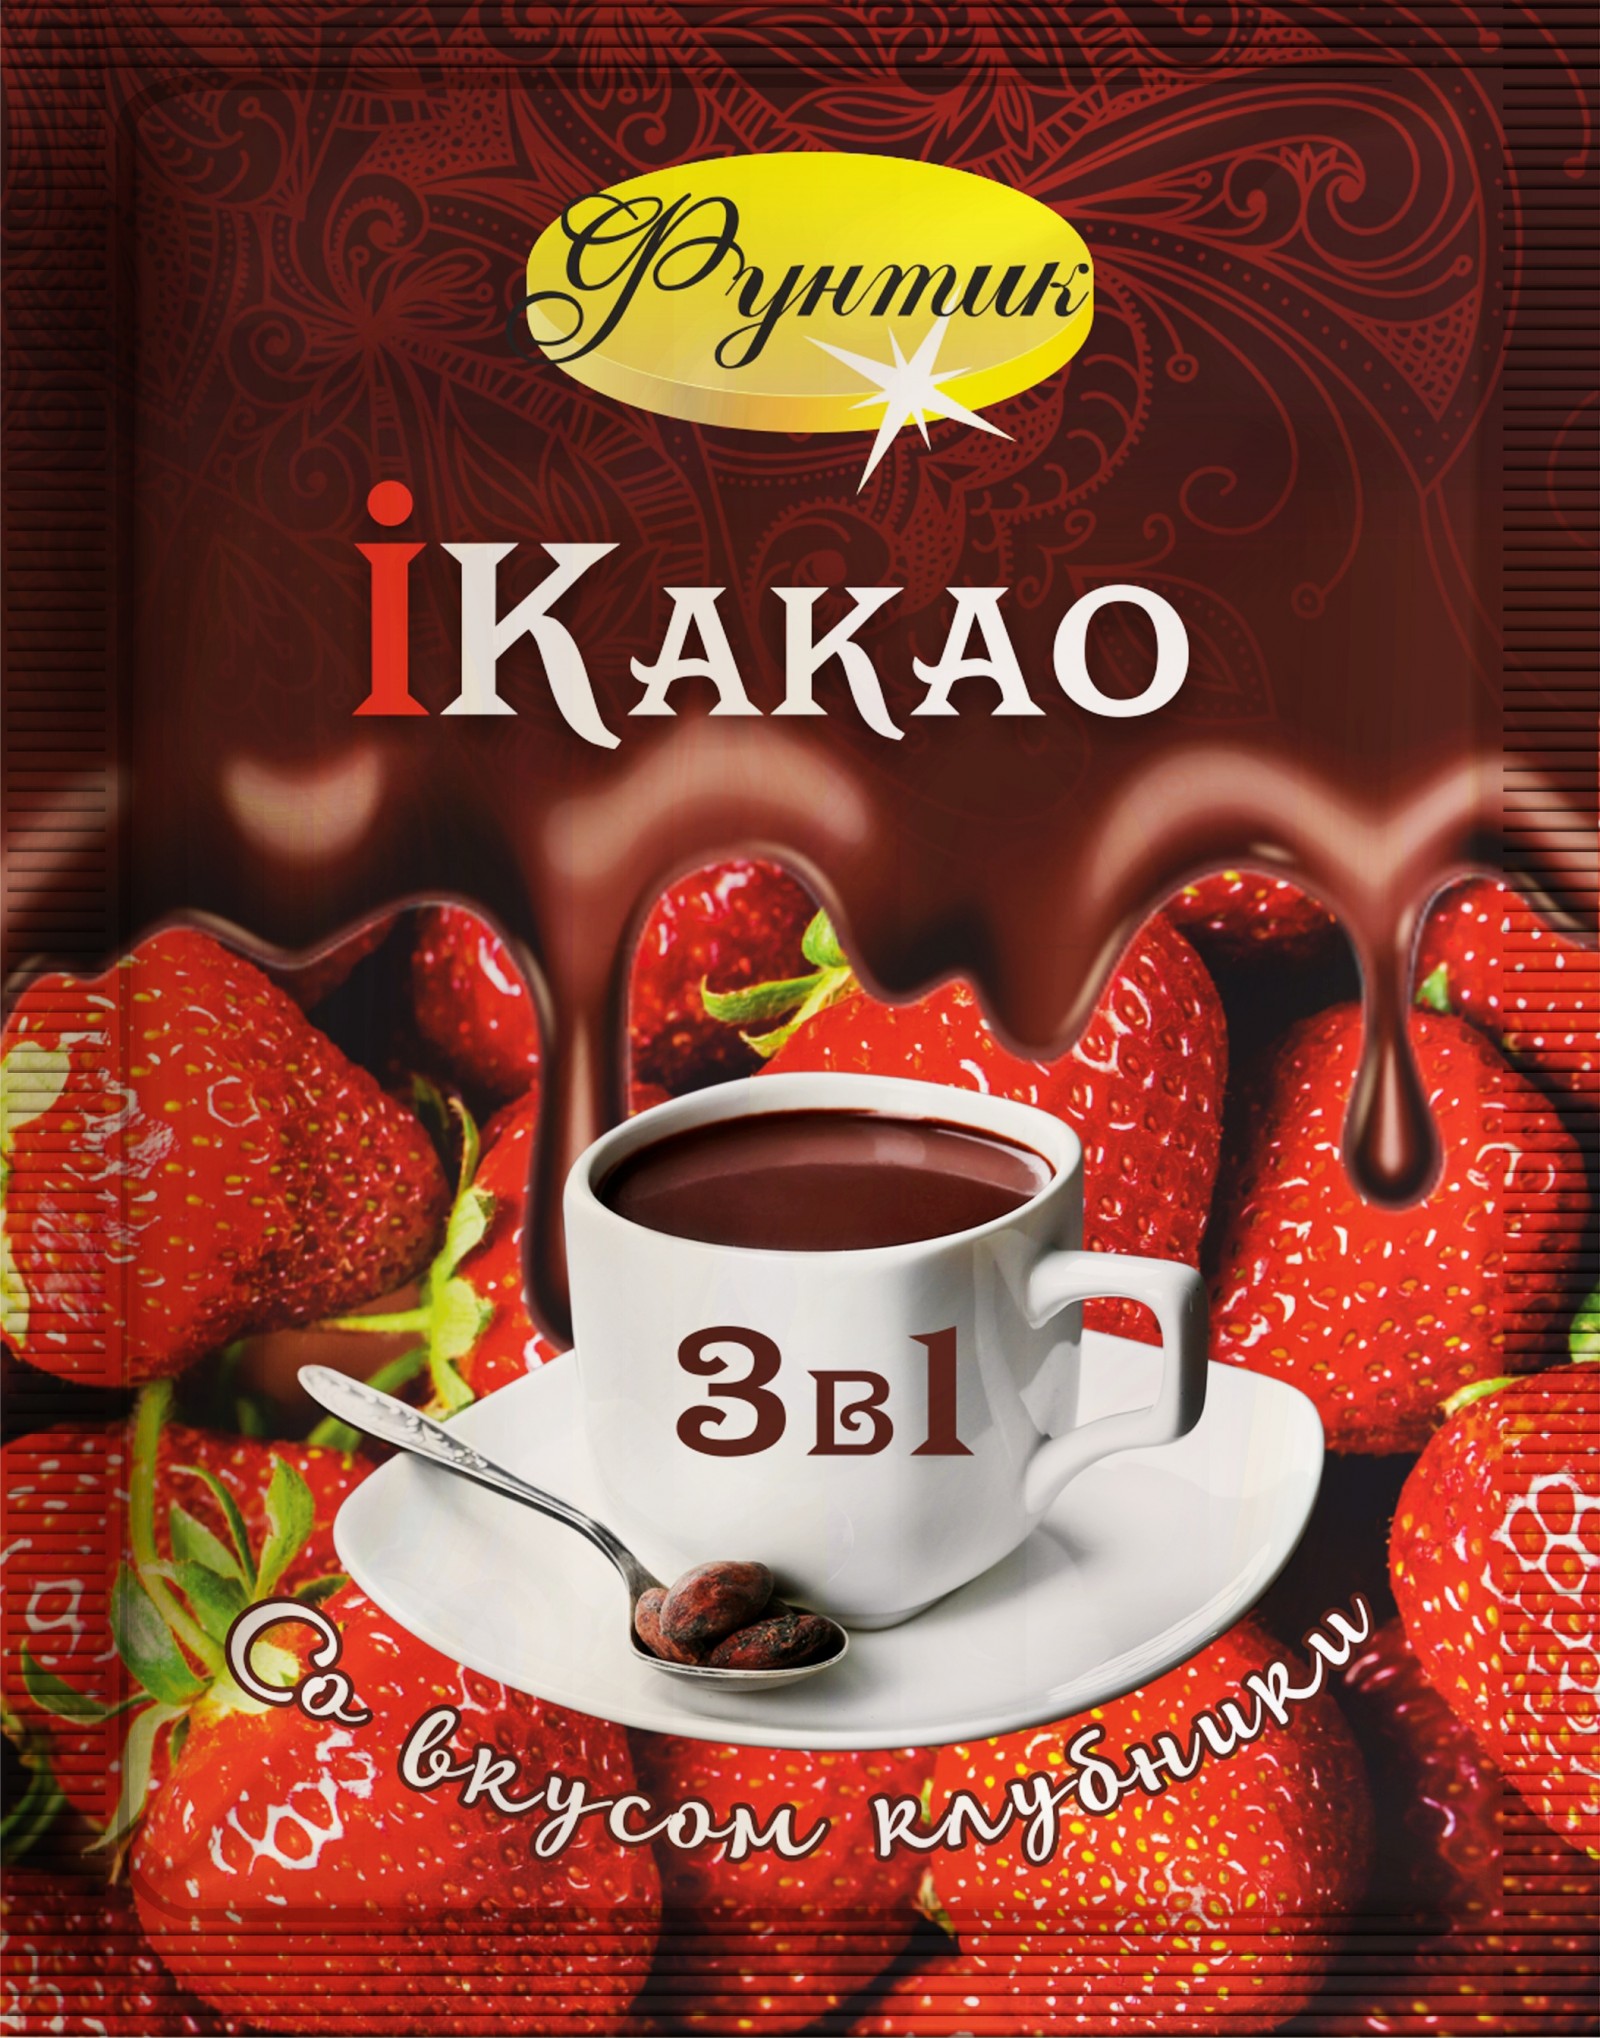 i Cocoa drink 3-in-1 with strawberry flavors - фото - 1